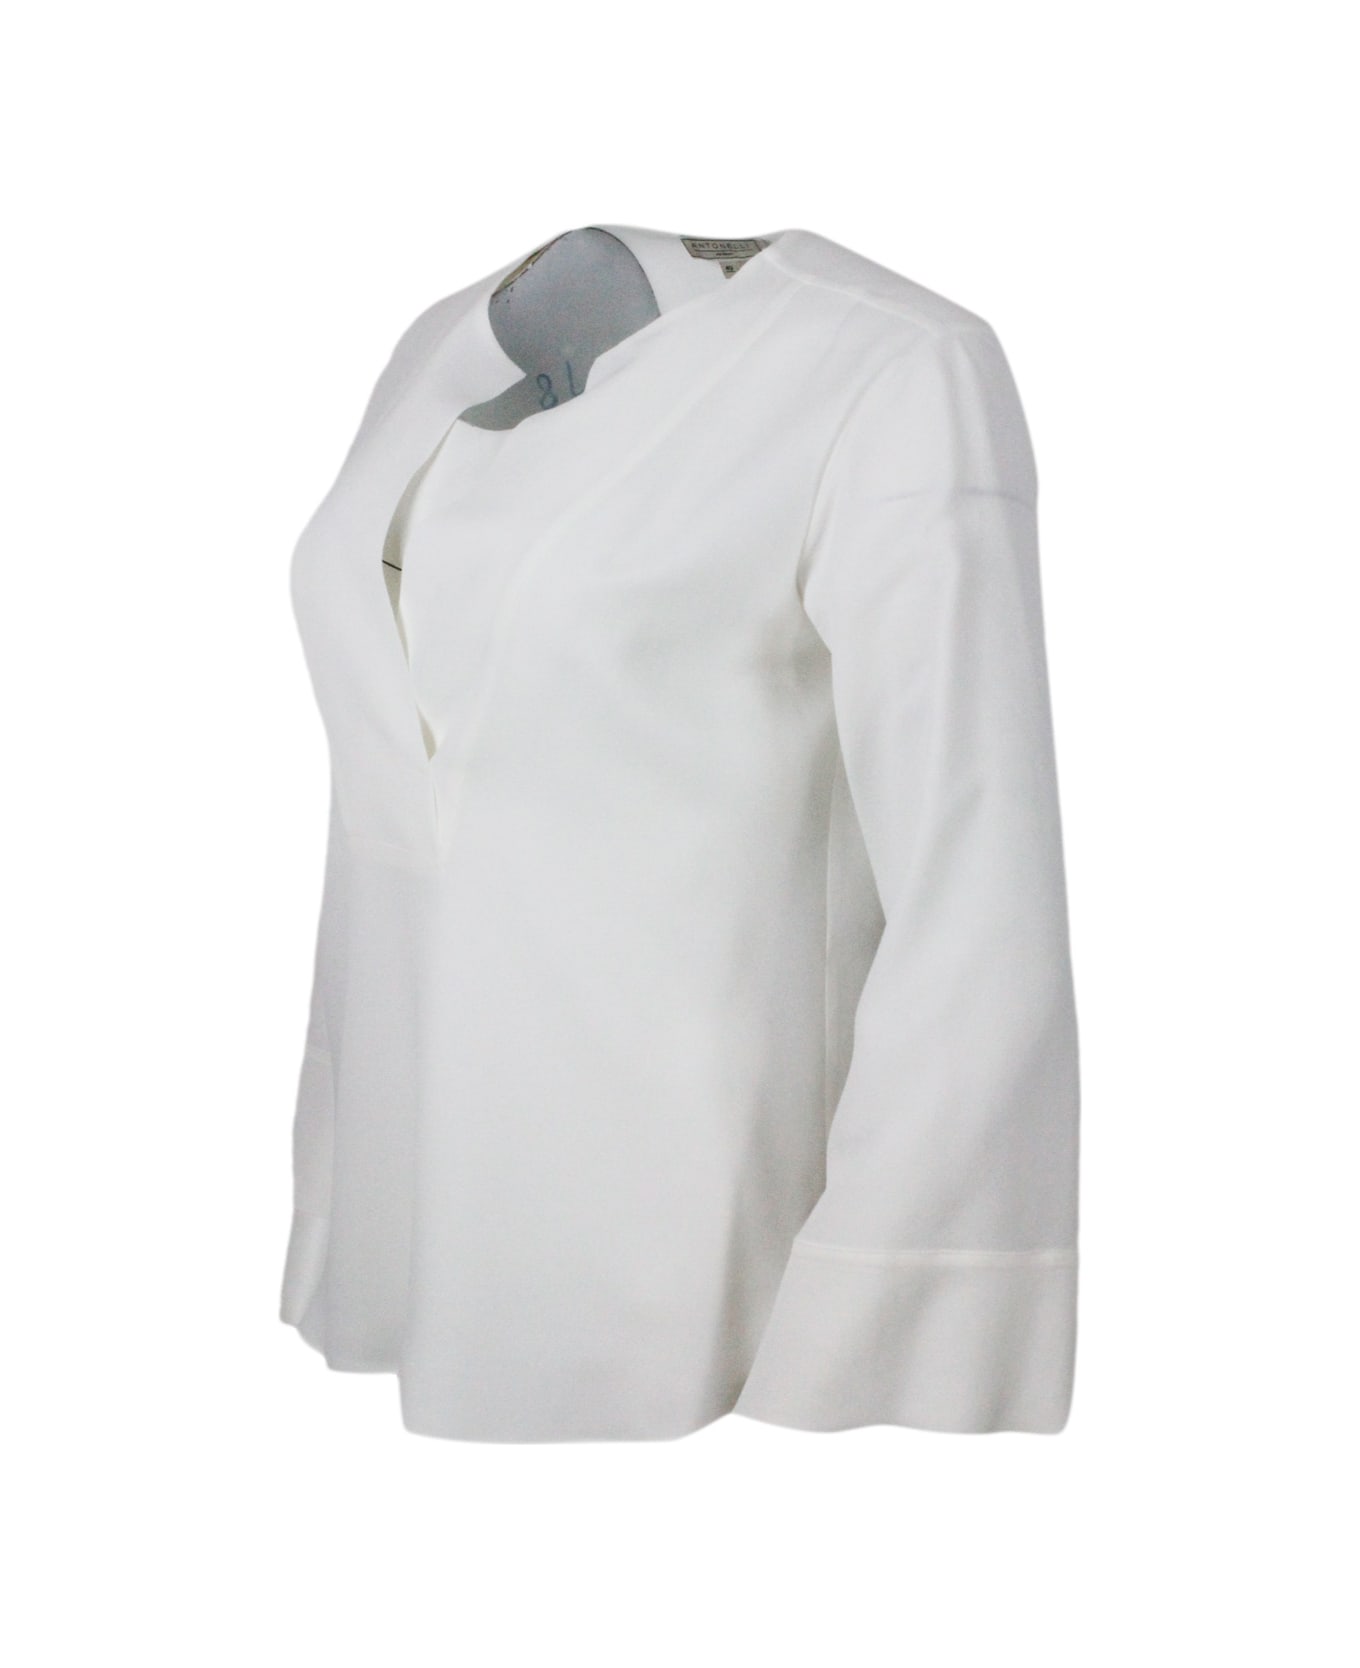 Antonelli Lightweight Shirt In Stretch Silk Crepes With V-neck. Fluid Fit - cream ブラウス